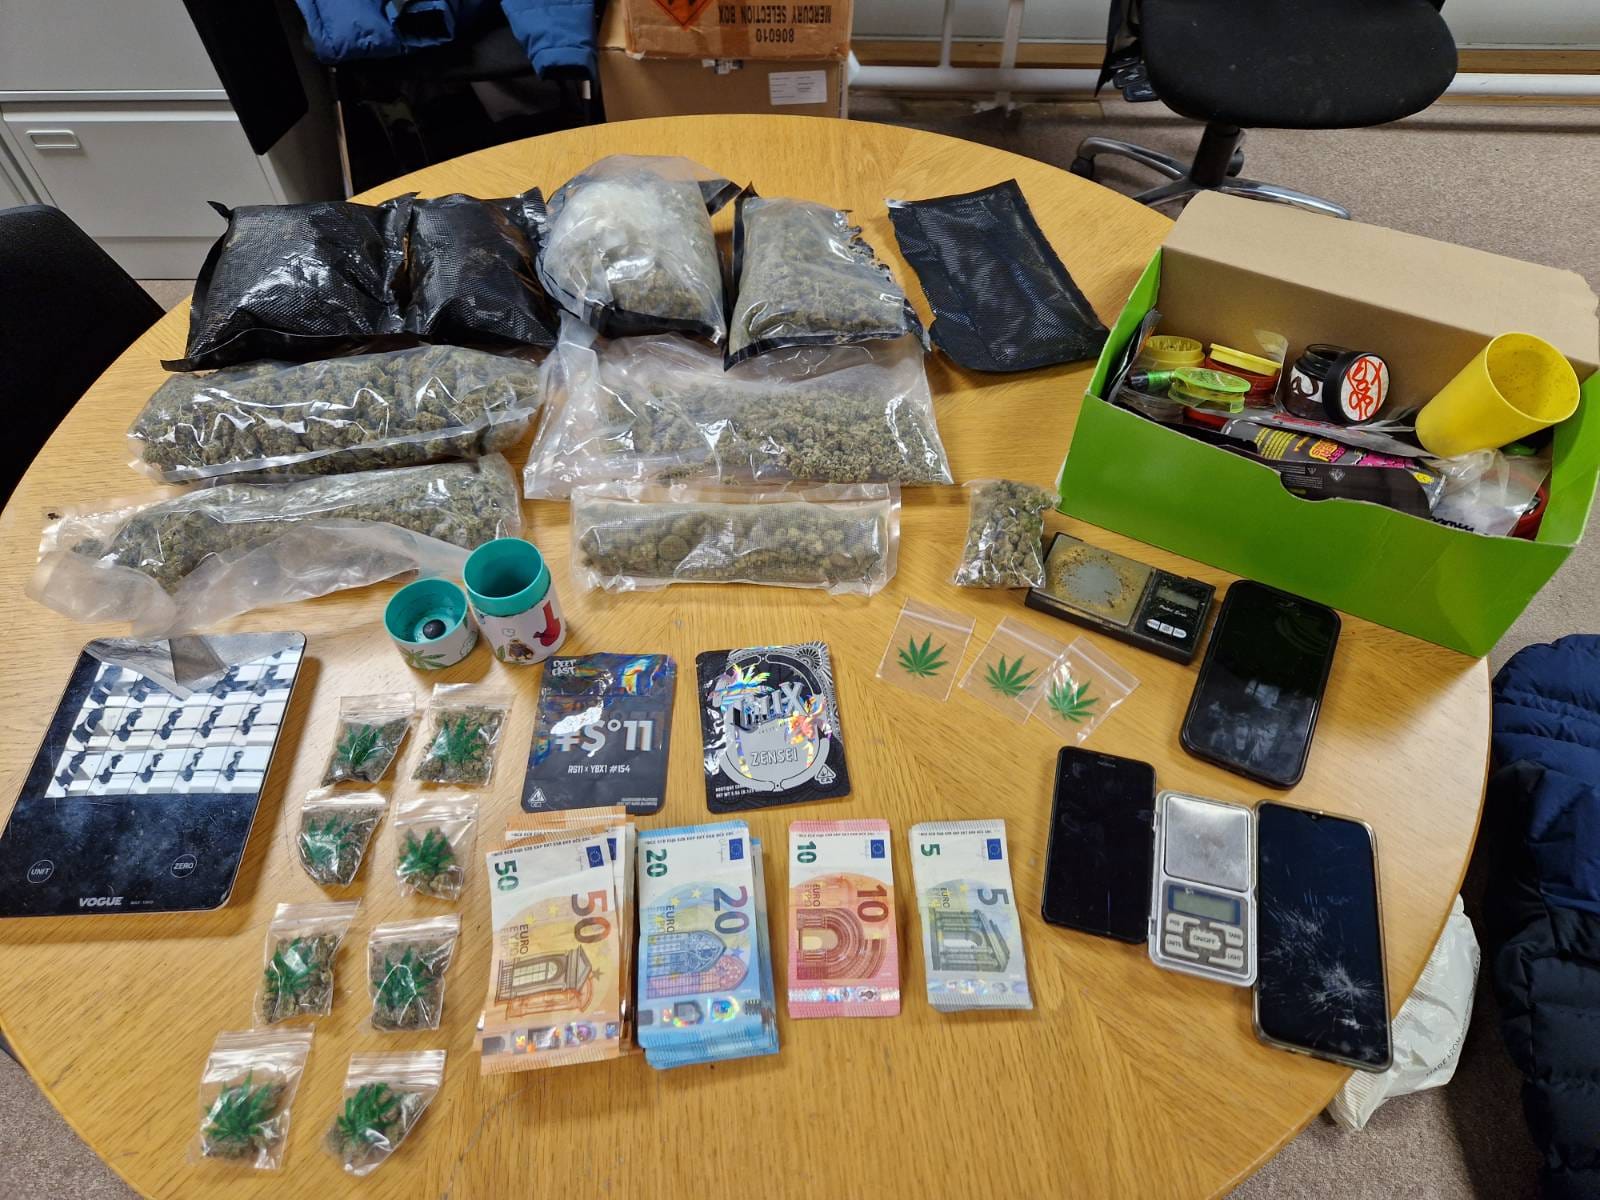 Some of the items seized by Gardaí in Dublin, 14-3-24